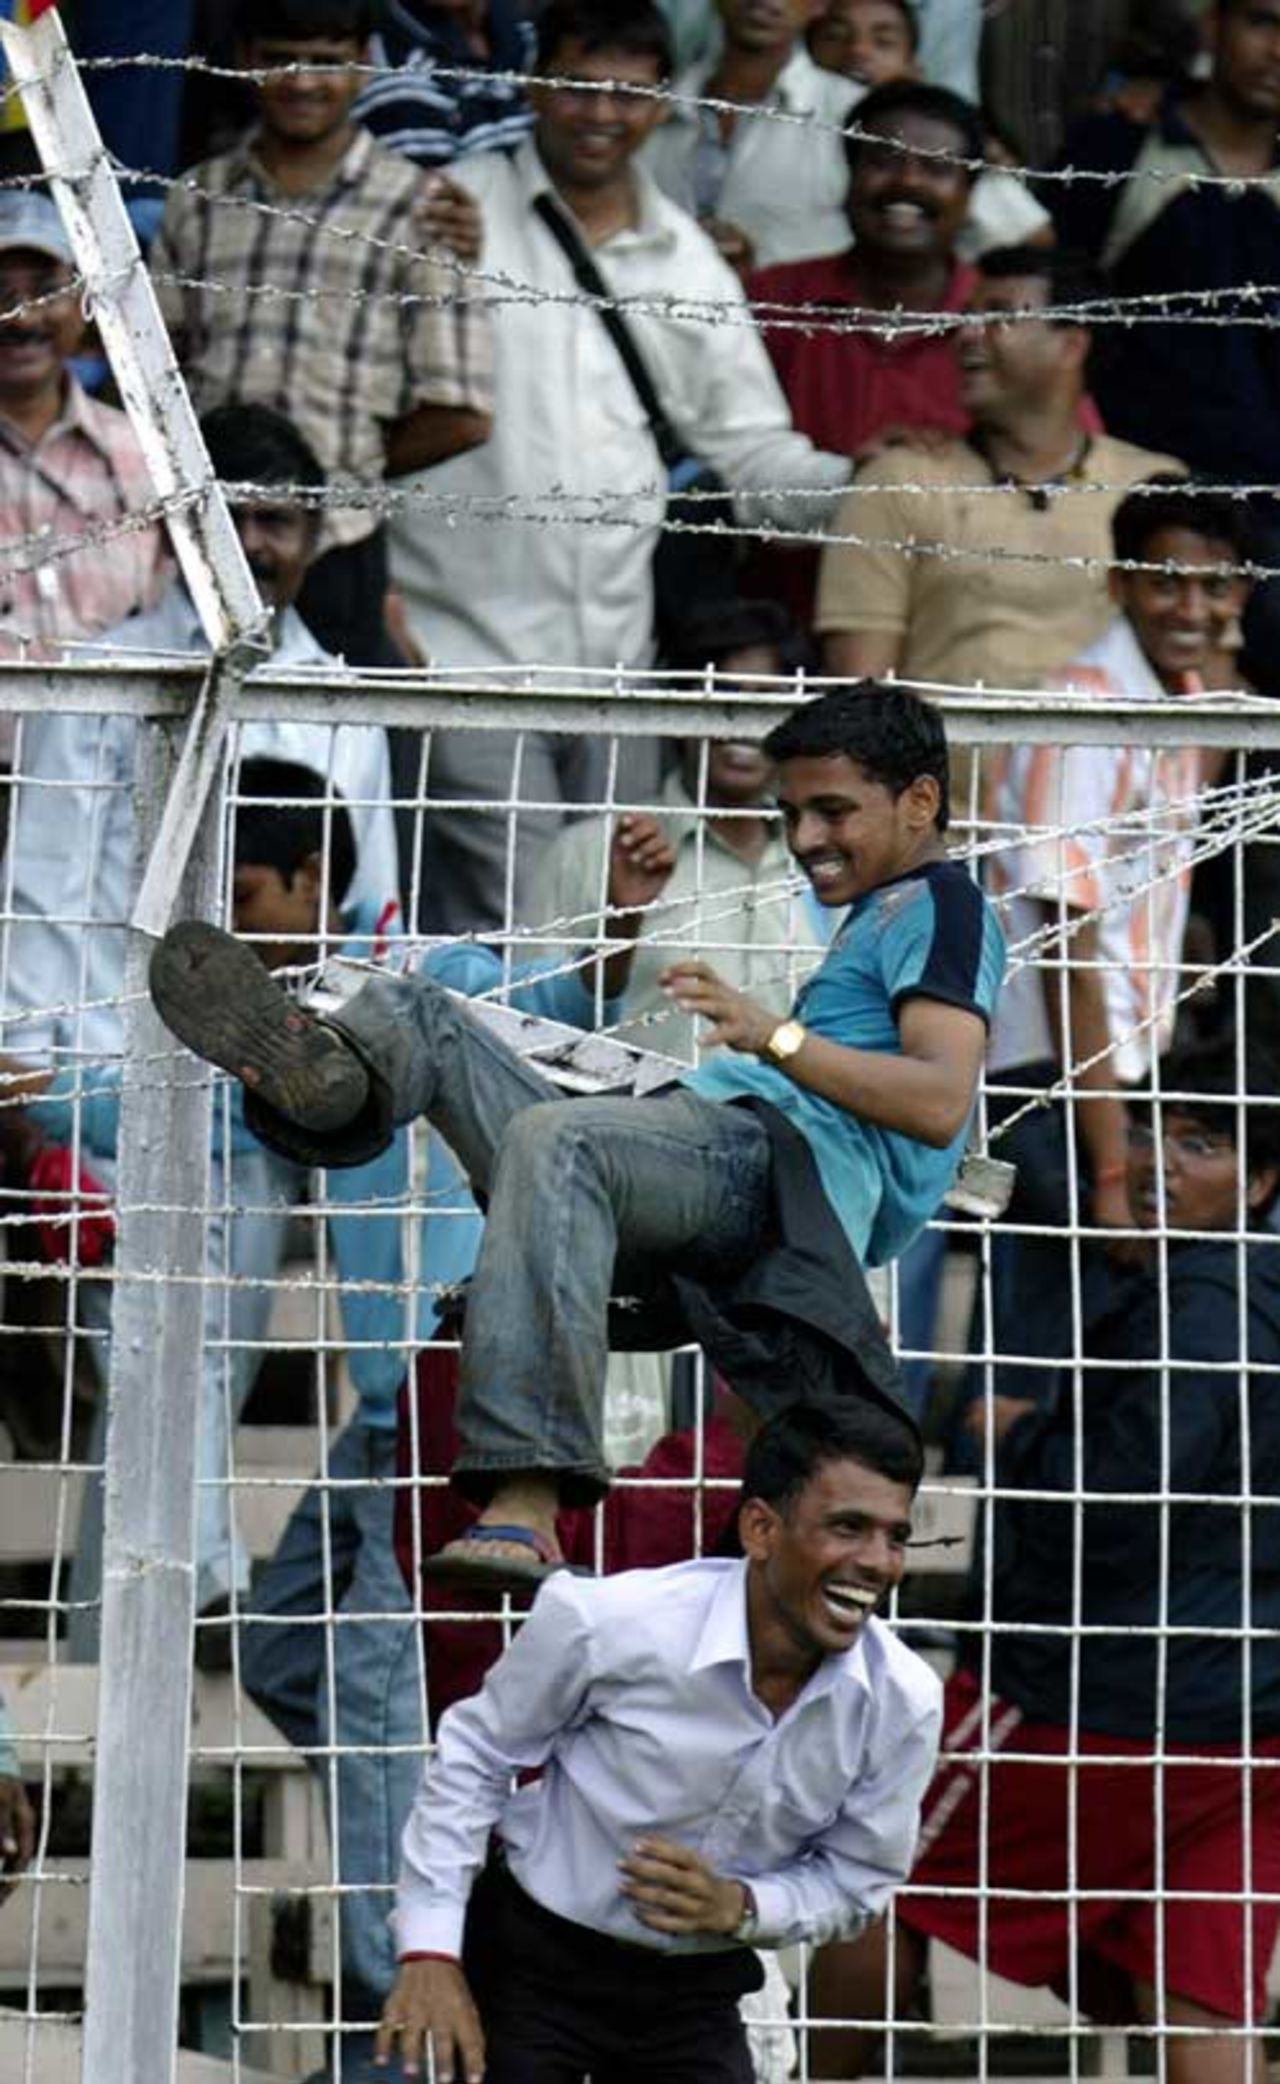 An Indian fan jumps across the barbed wire fence to get a closer look at the national team at a welcome ceremony, Wankhede Stadium, Mumbai, September 26, 2007